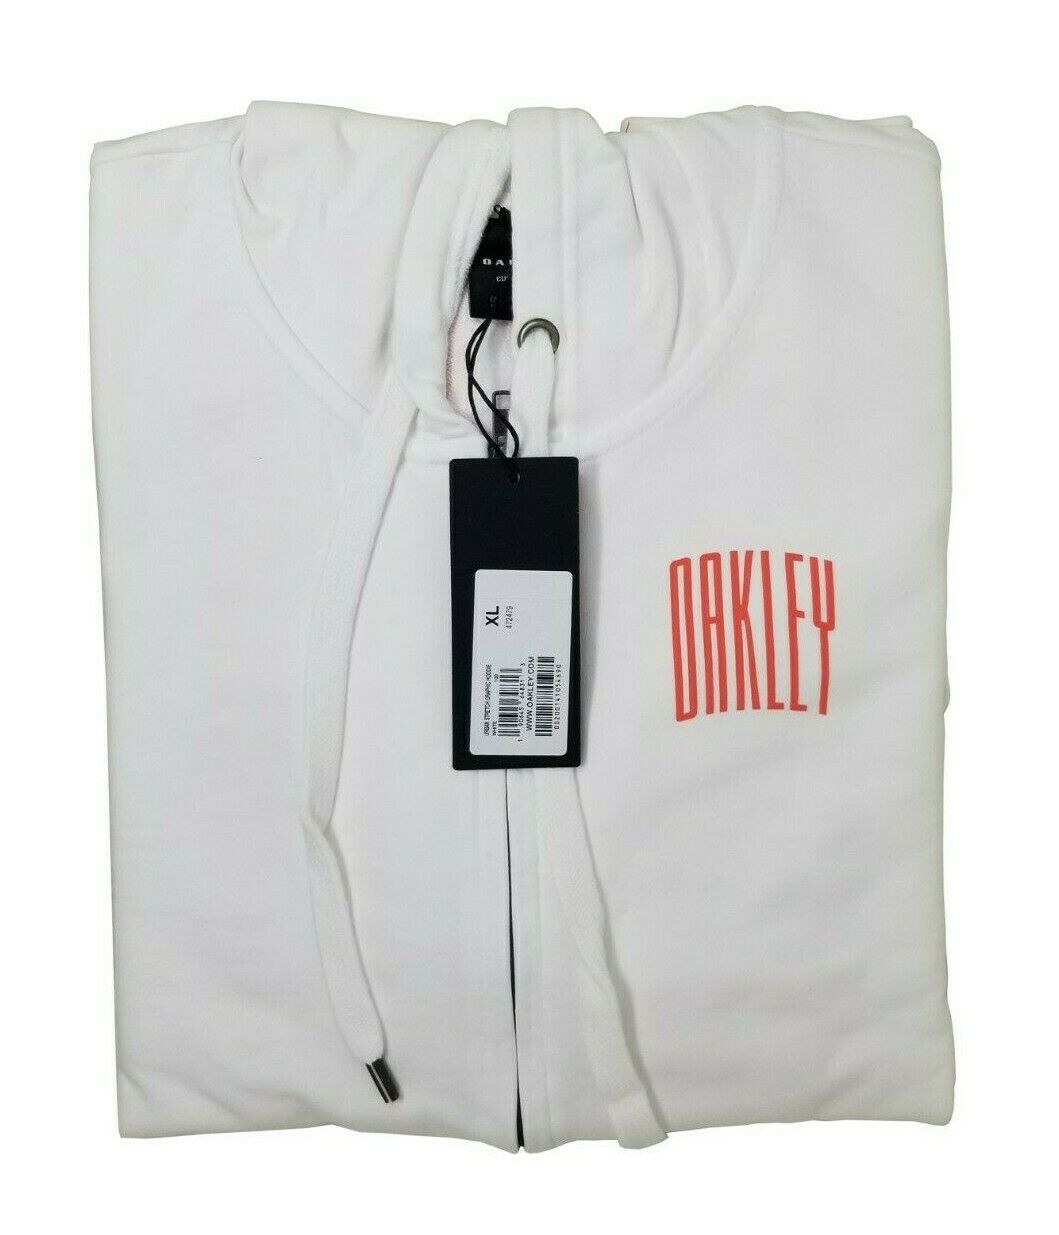 Oakley Men's Urban Stretch Graphic Hoodie 472479 White Size XL - image 2 of 3